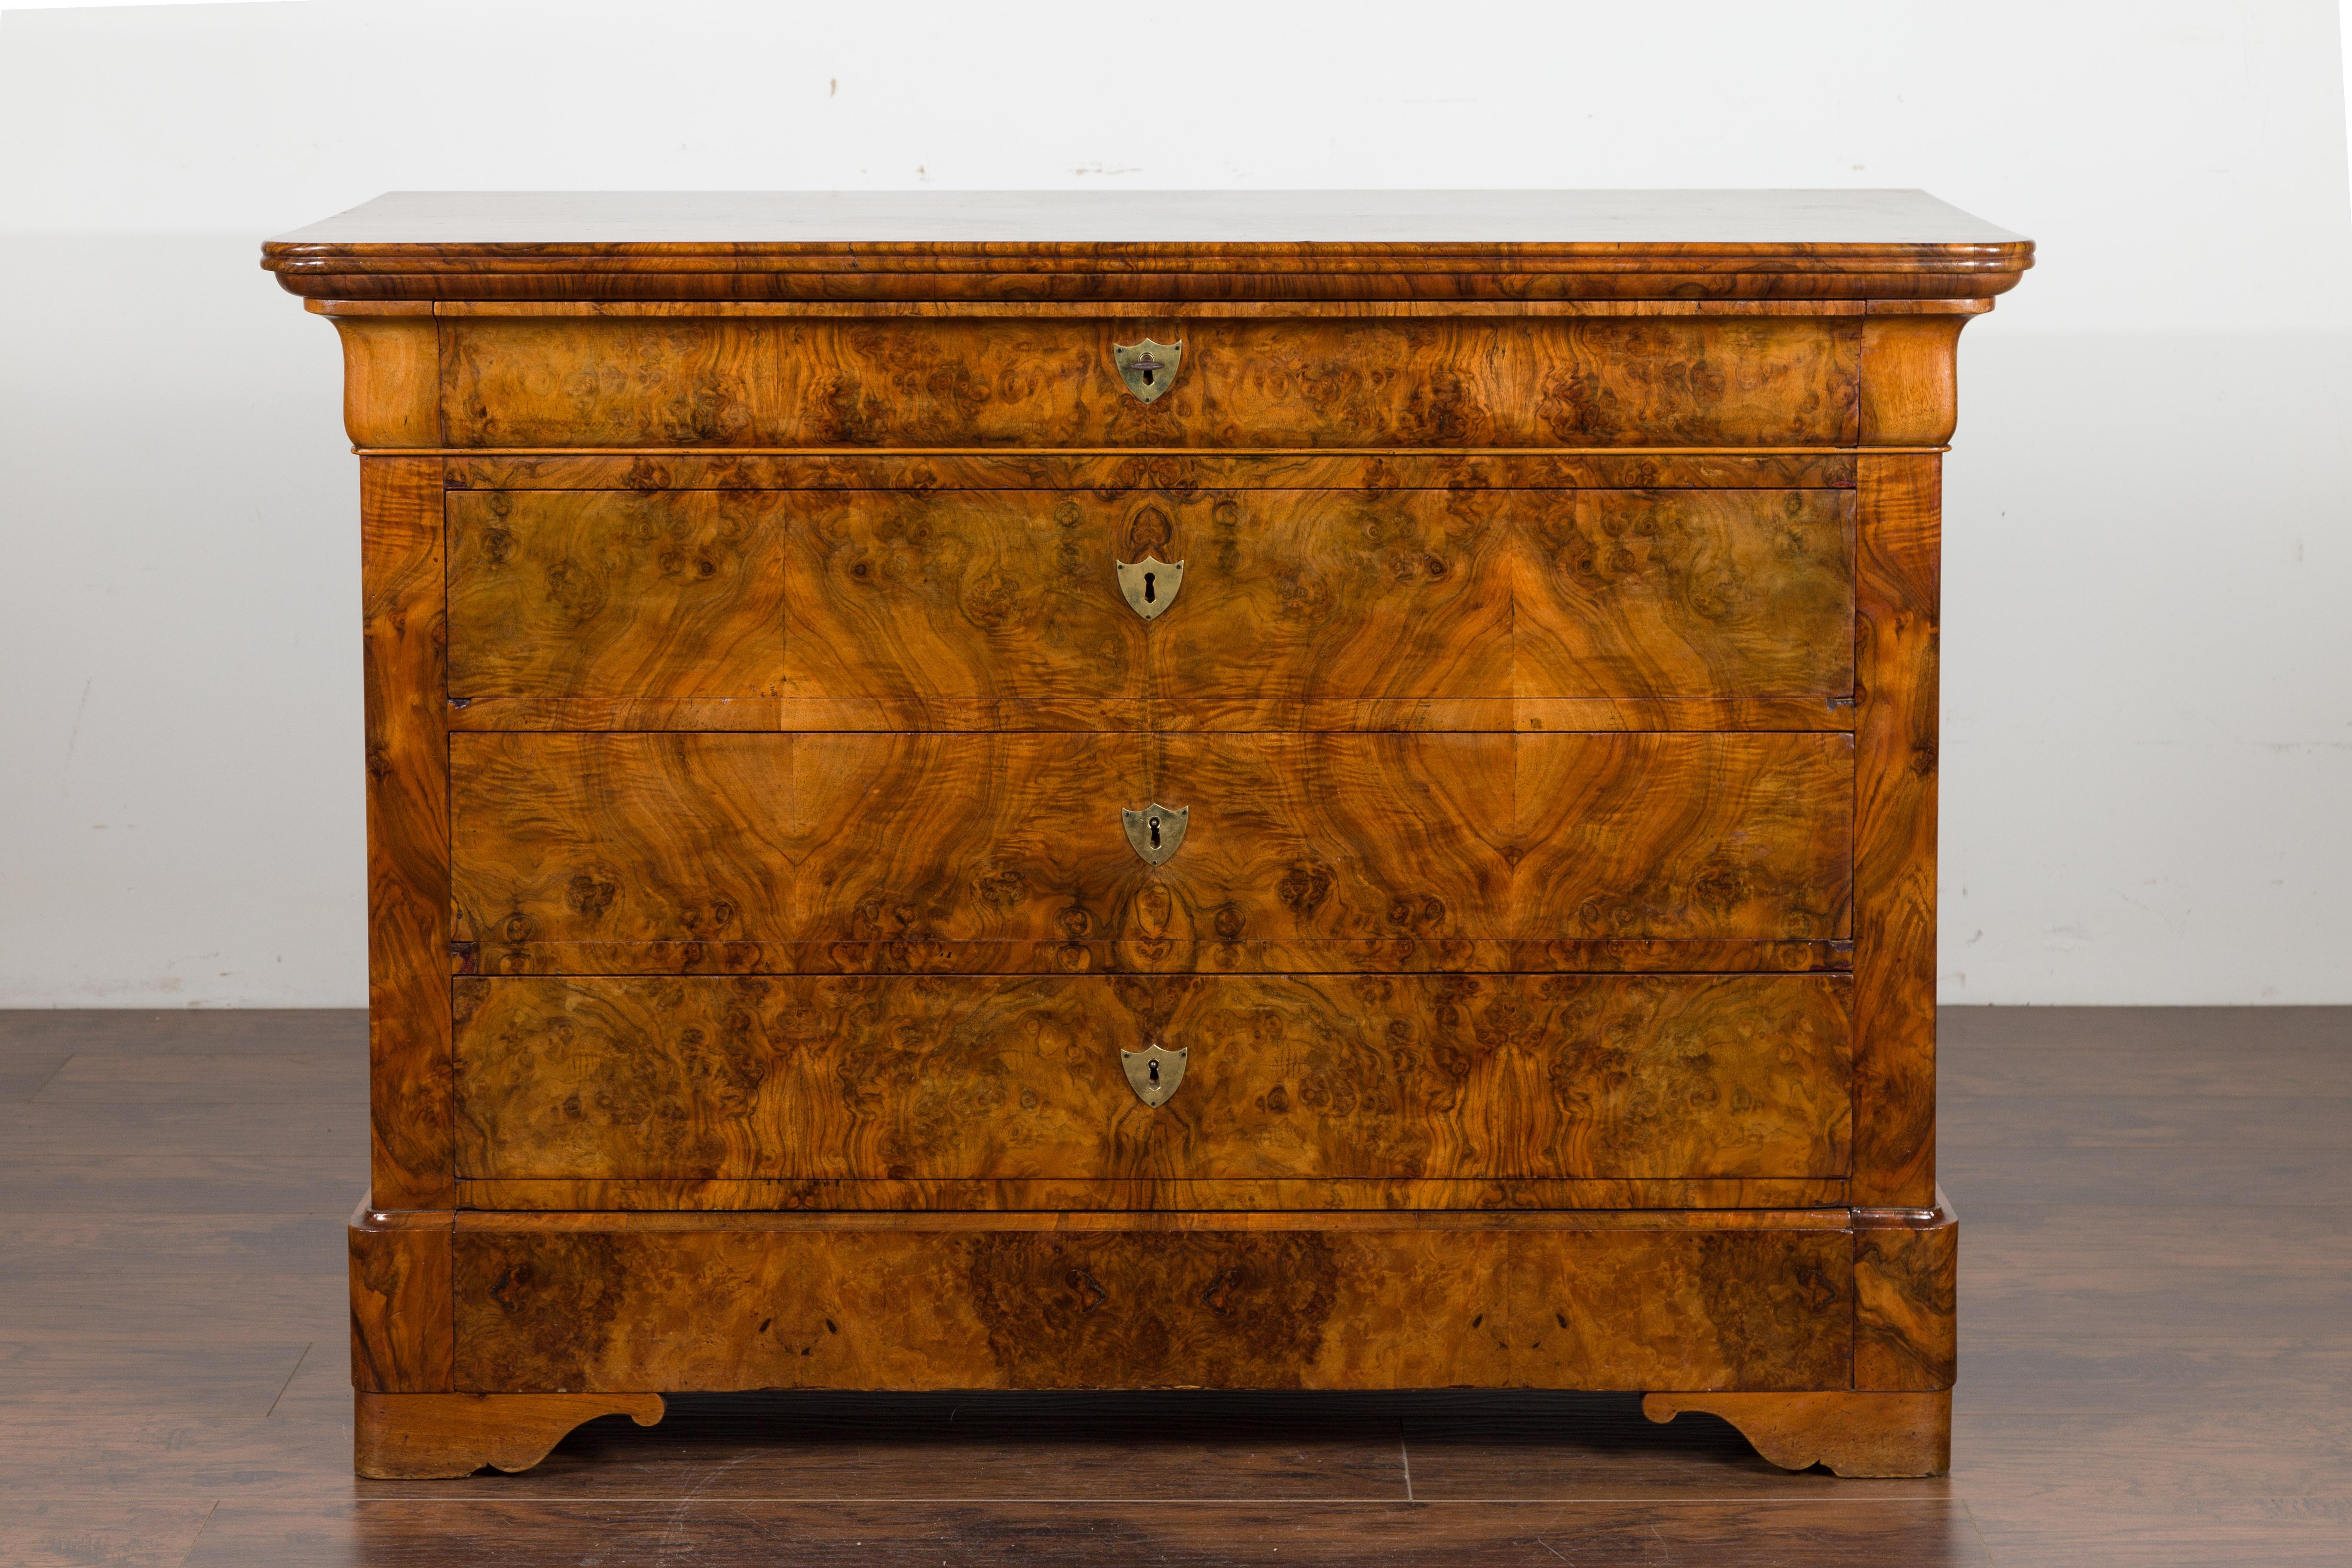 A French Louis-Philippe style walnut commode from the late 19th century, with five drawers and butterfly veneer. Created in France during the third quarter of the 19th century, this walnut commode features an exquisite veneered top sitting above